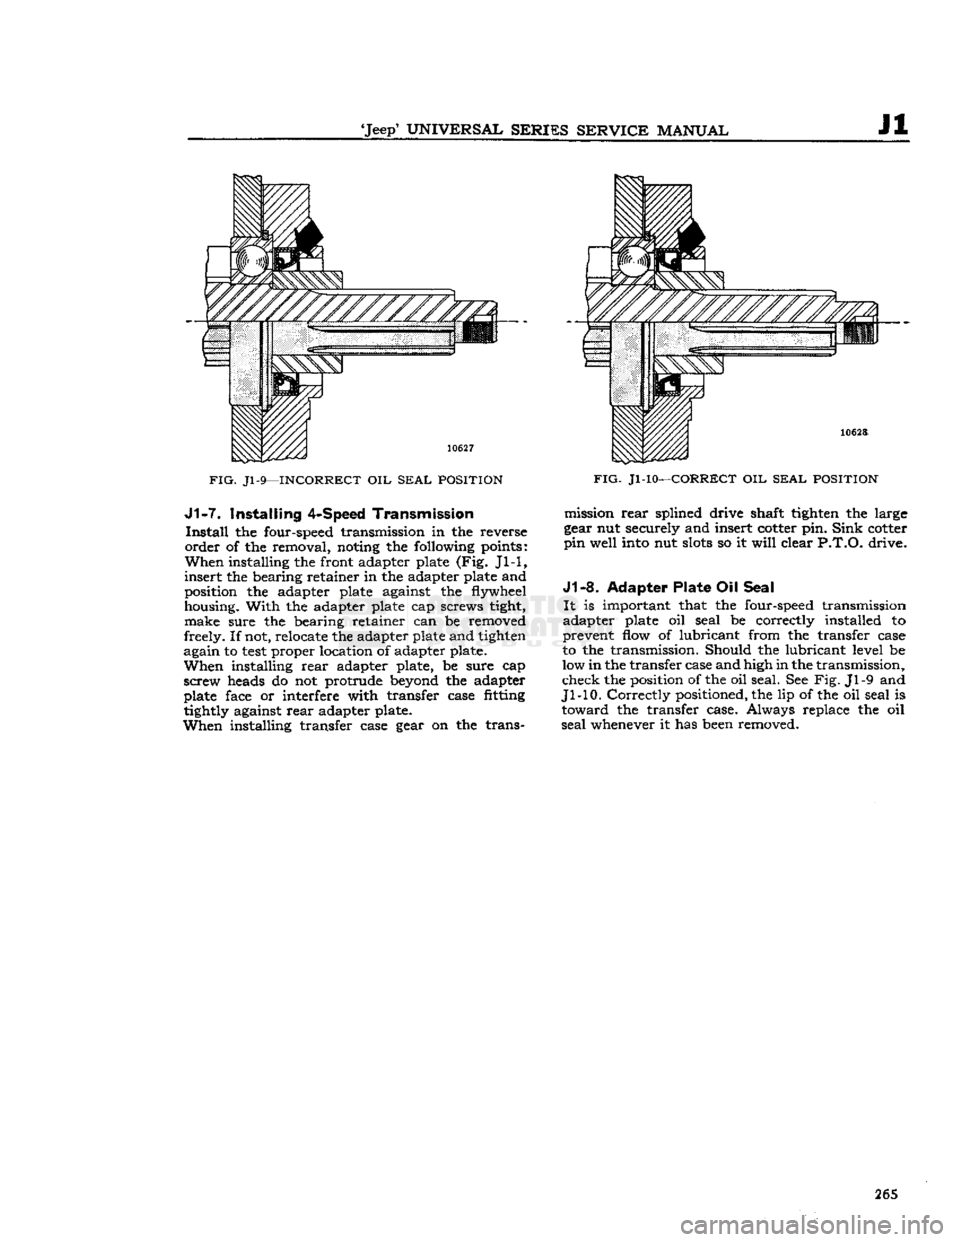 JEEP CJ 1953  Service Manual 
Jeep
 UNIVERSAL SERIES SERVICE
 MANUAL 

Jl 

FIG.
 Jl-9—INCORRECT
 OIL
 SEAL POSITION  J1-7.
 Installing
 4-Speed
 Transmission 

Install
 the four-speed transmission in the reverse 

order
 of 